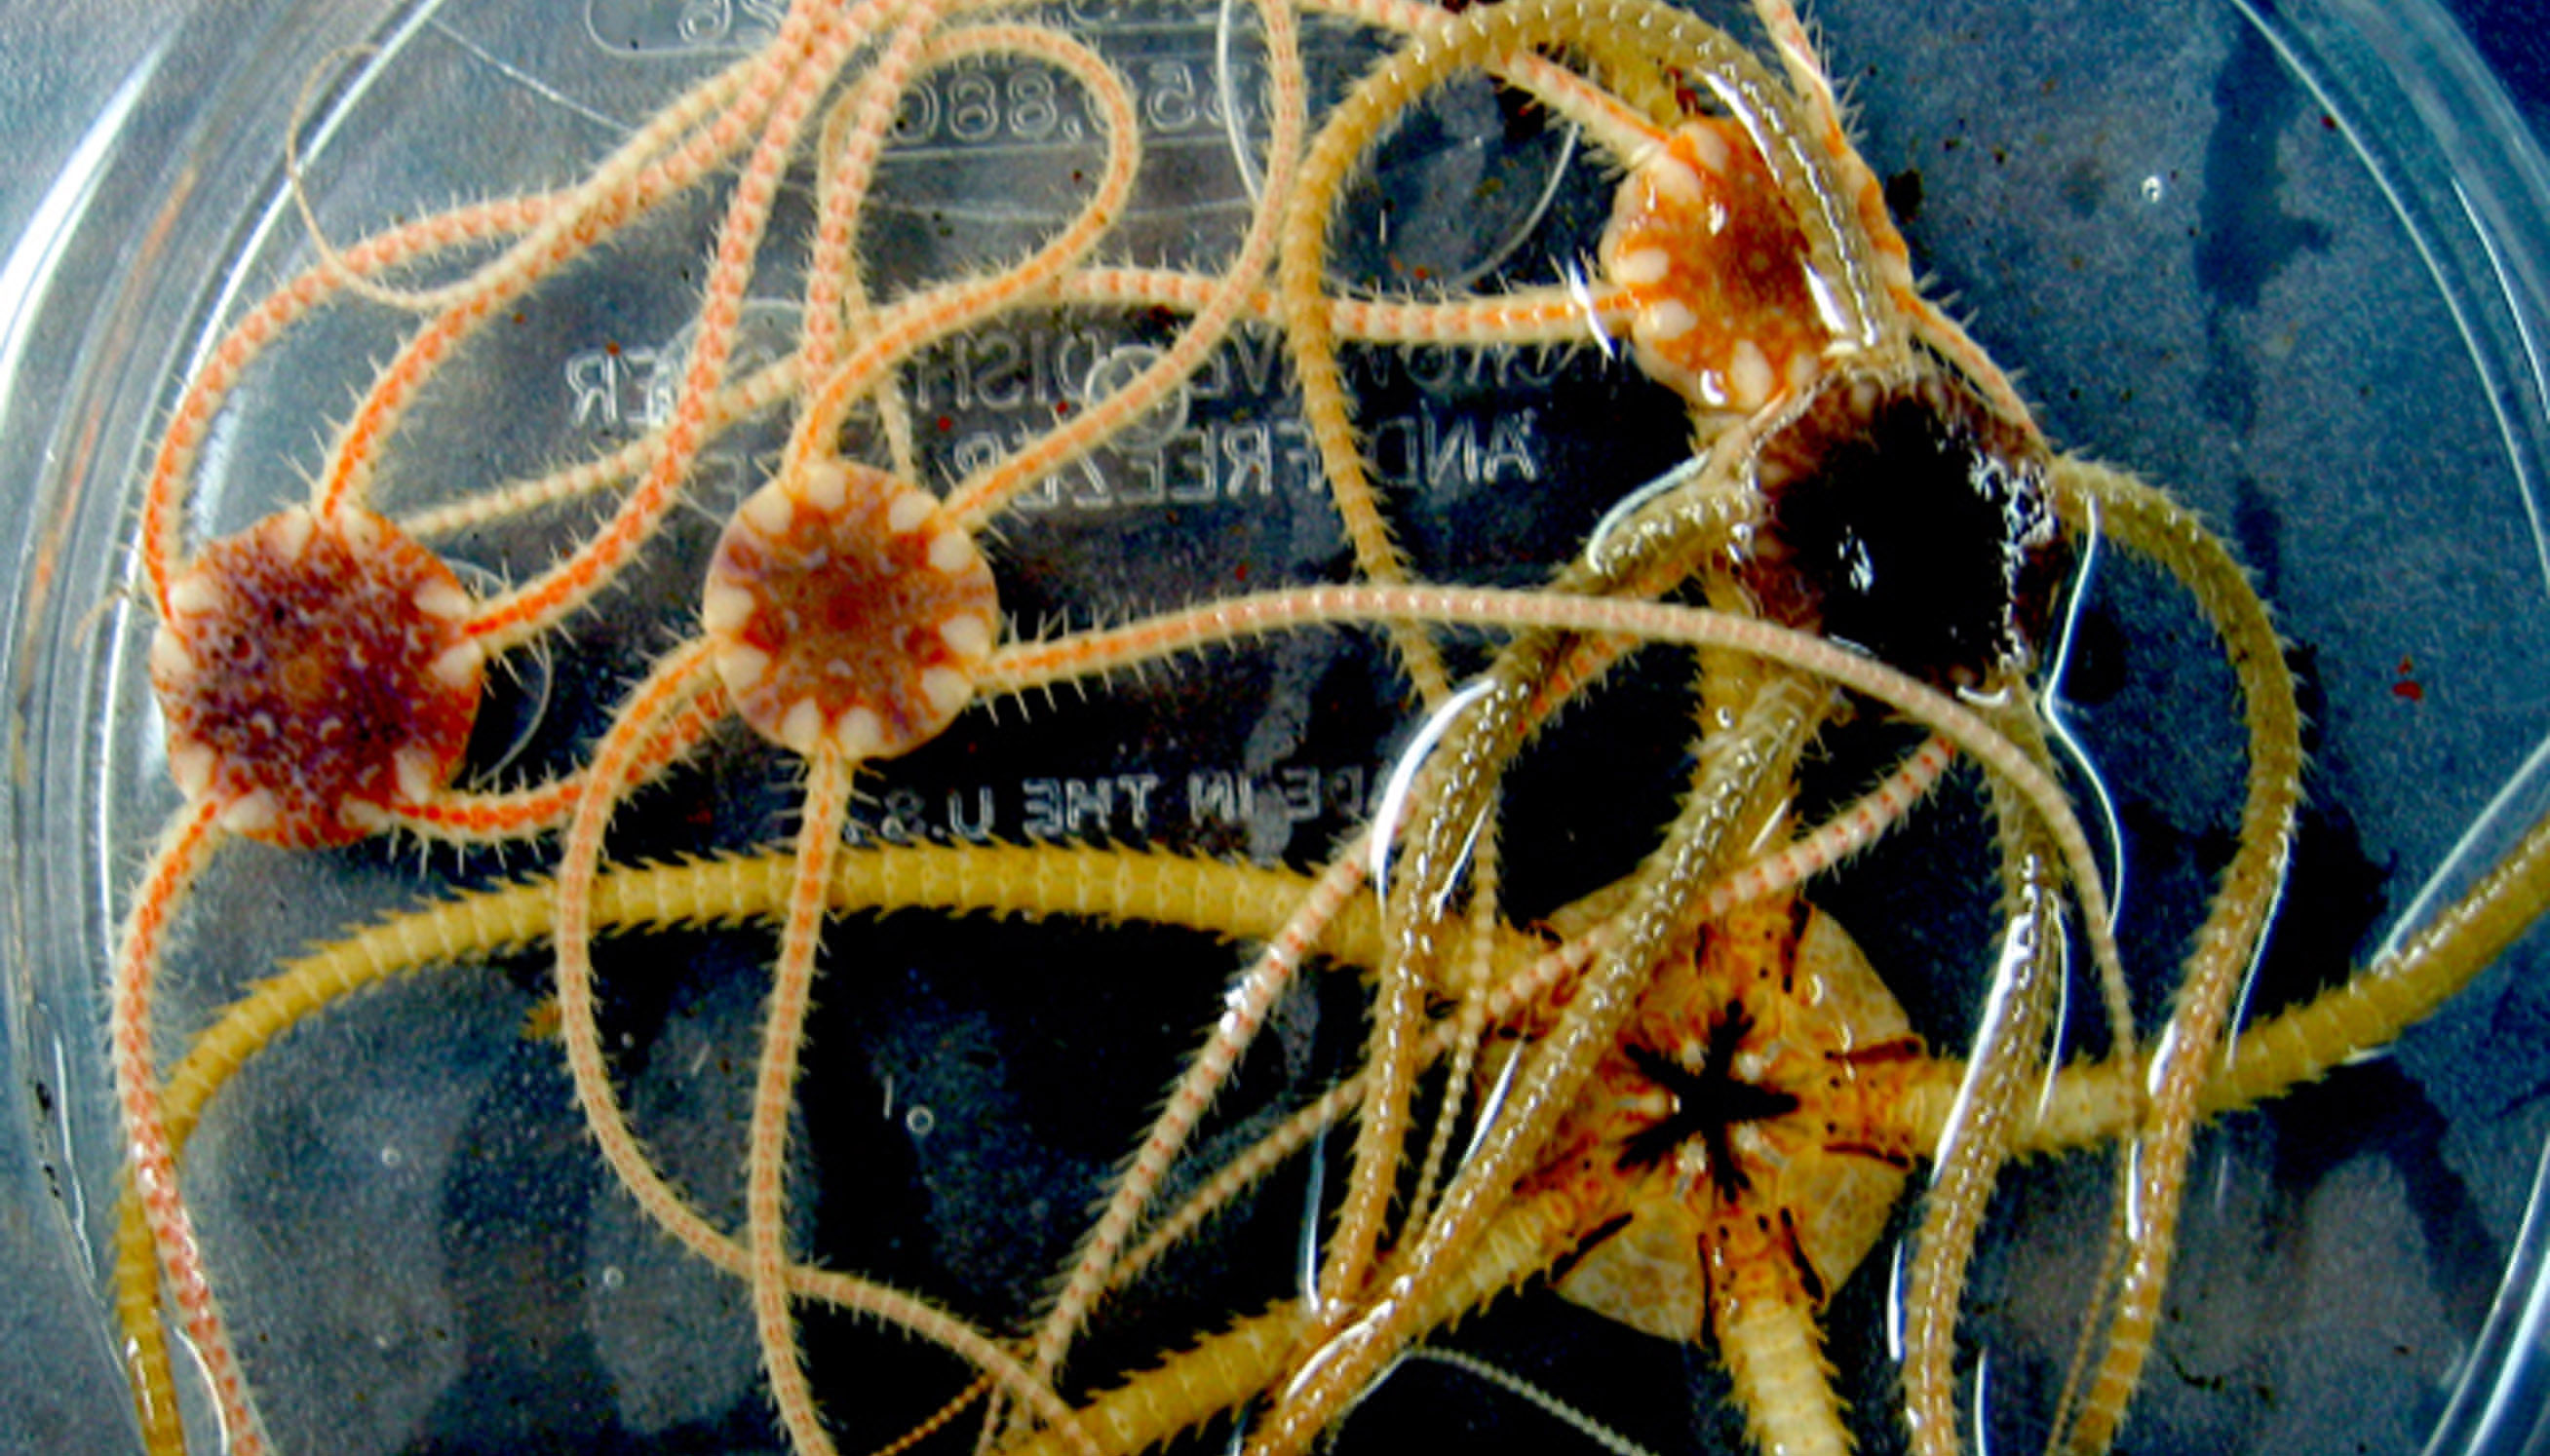 Numerous small ophiuroids recovered in 2005 from the outside flanks of the Vailulu'u underwater volcano near American Samoa.